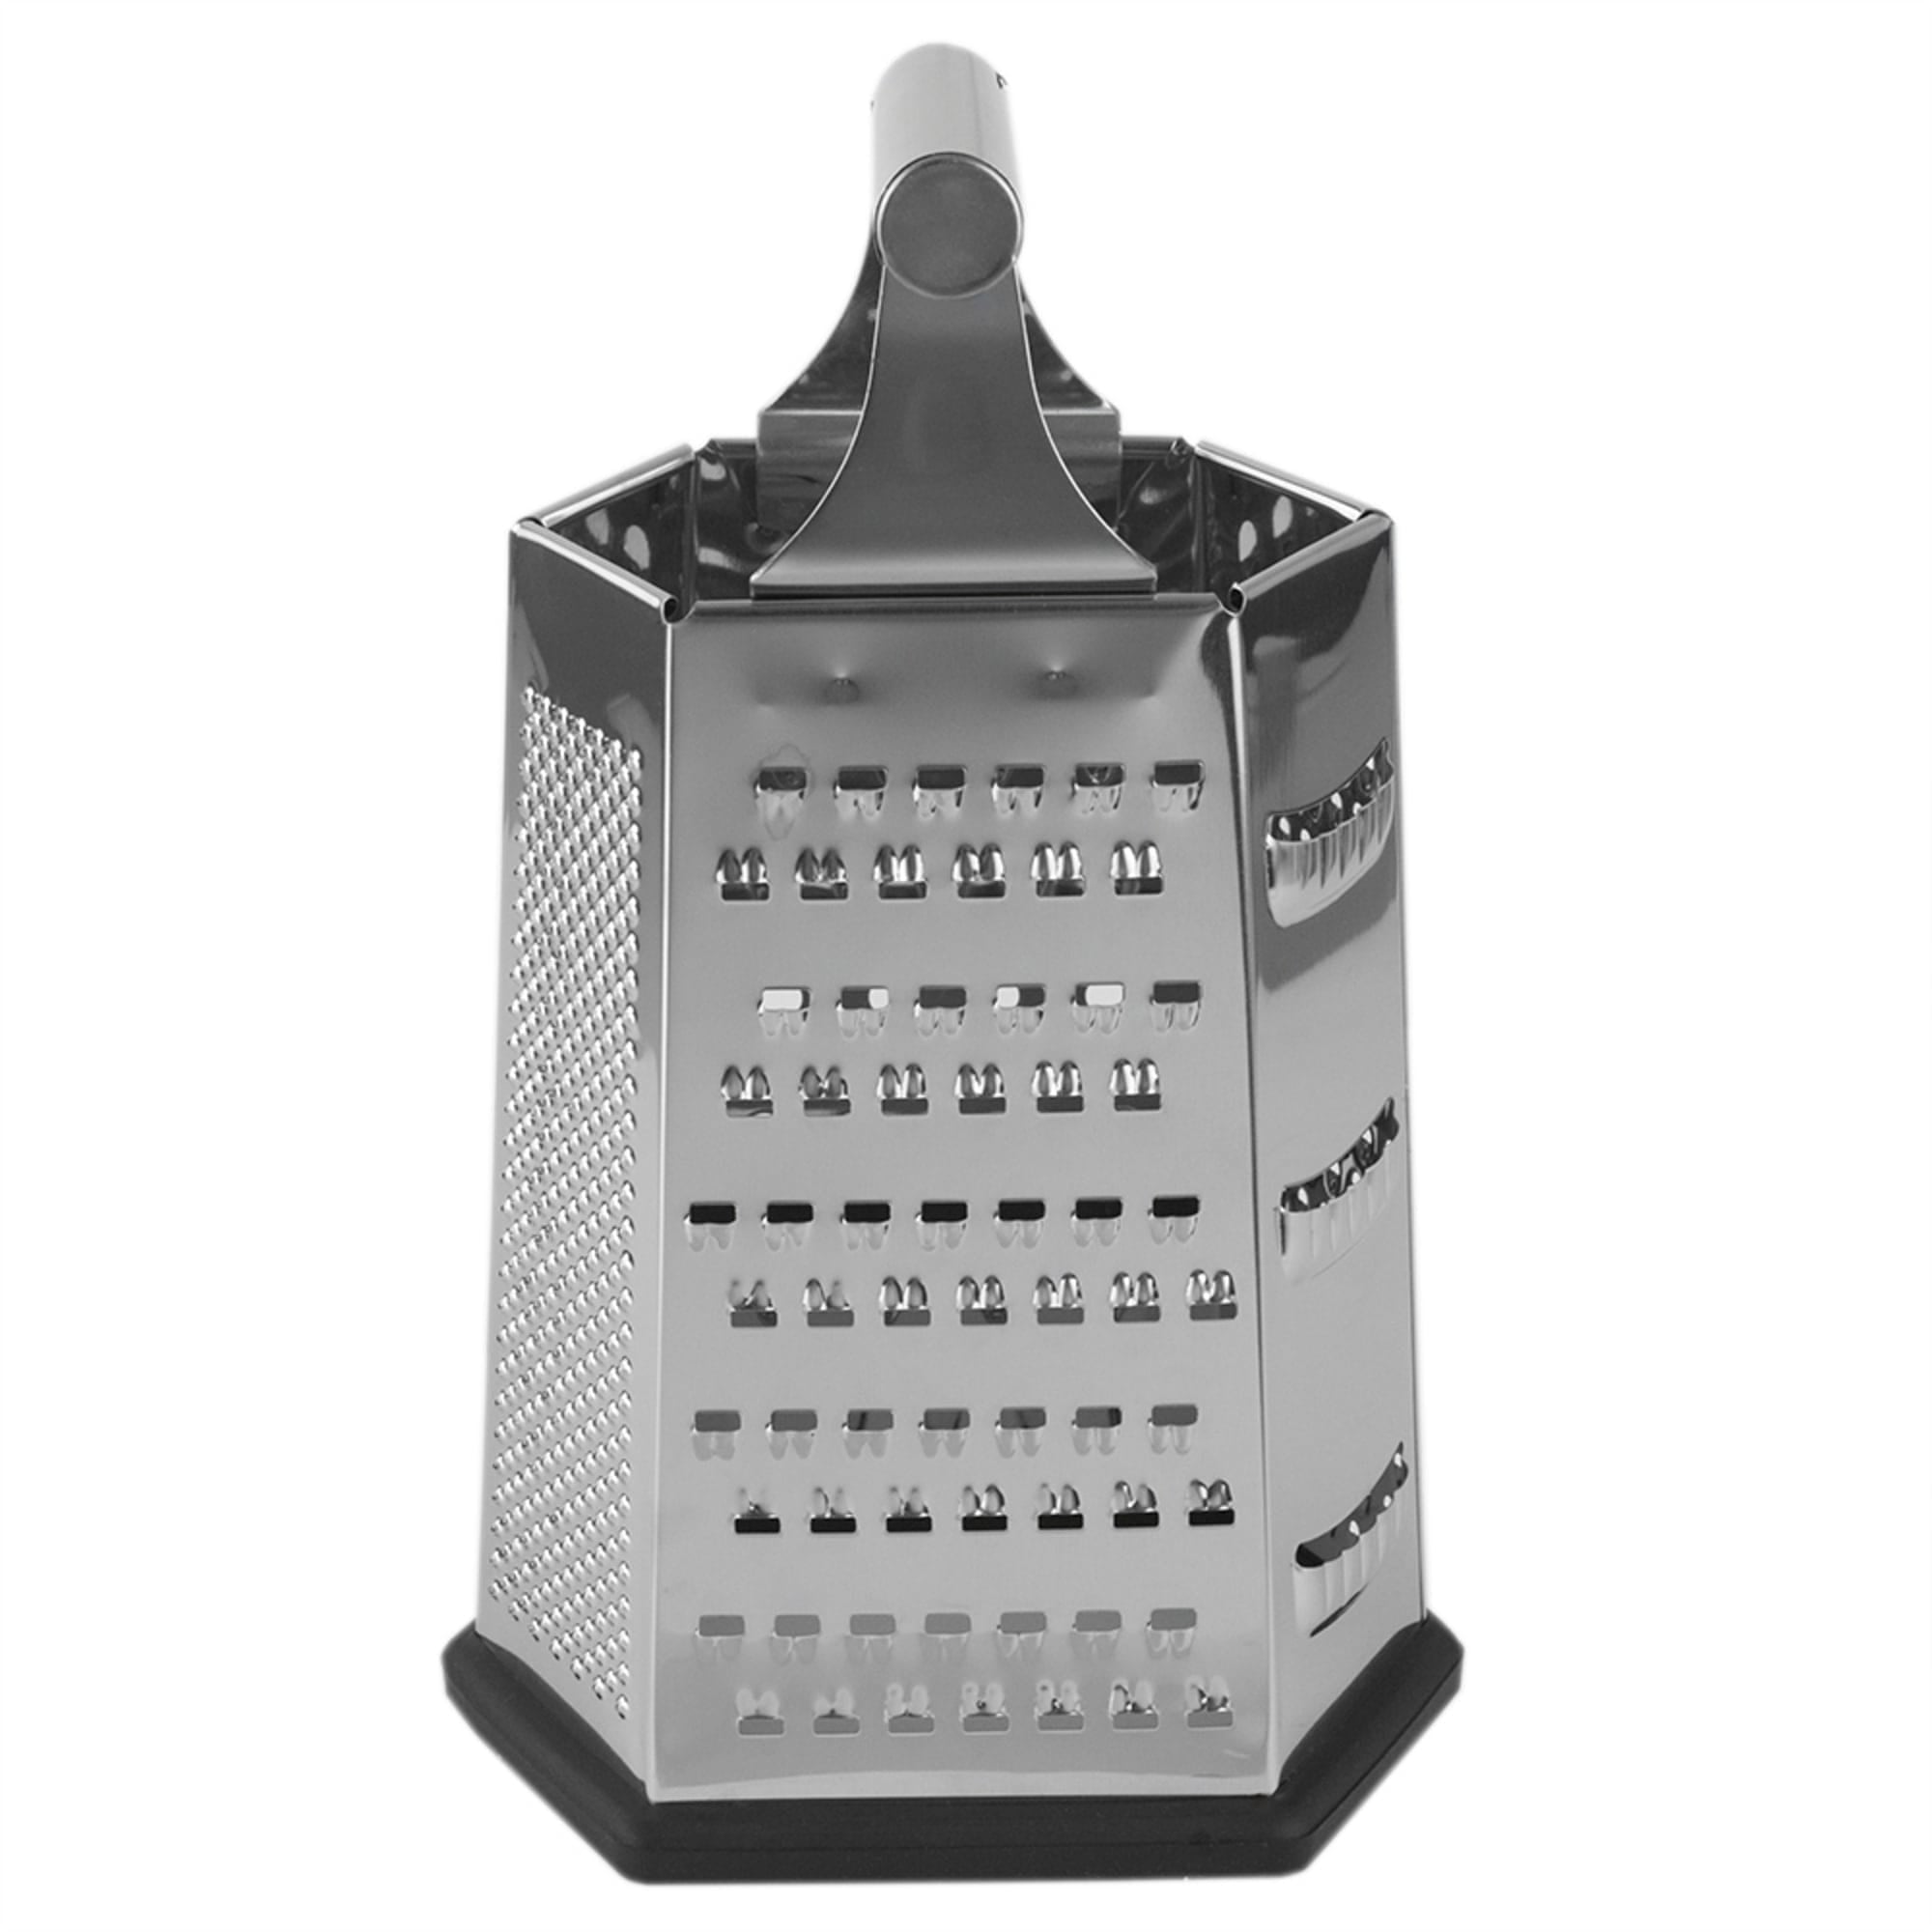 Home Basics Heavy Weight 6 Sided Stainless Steel Cheese Grater with Non-Skid Rubber Base, Black $4.00 EACH, CASE PACK OF 24